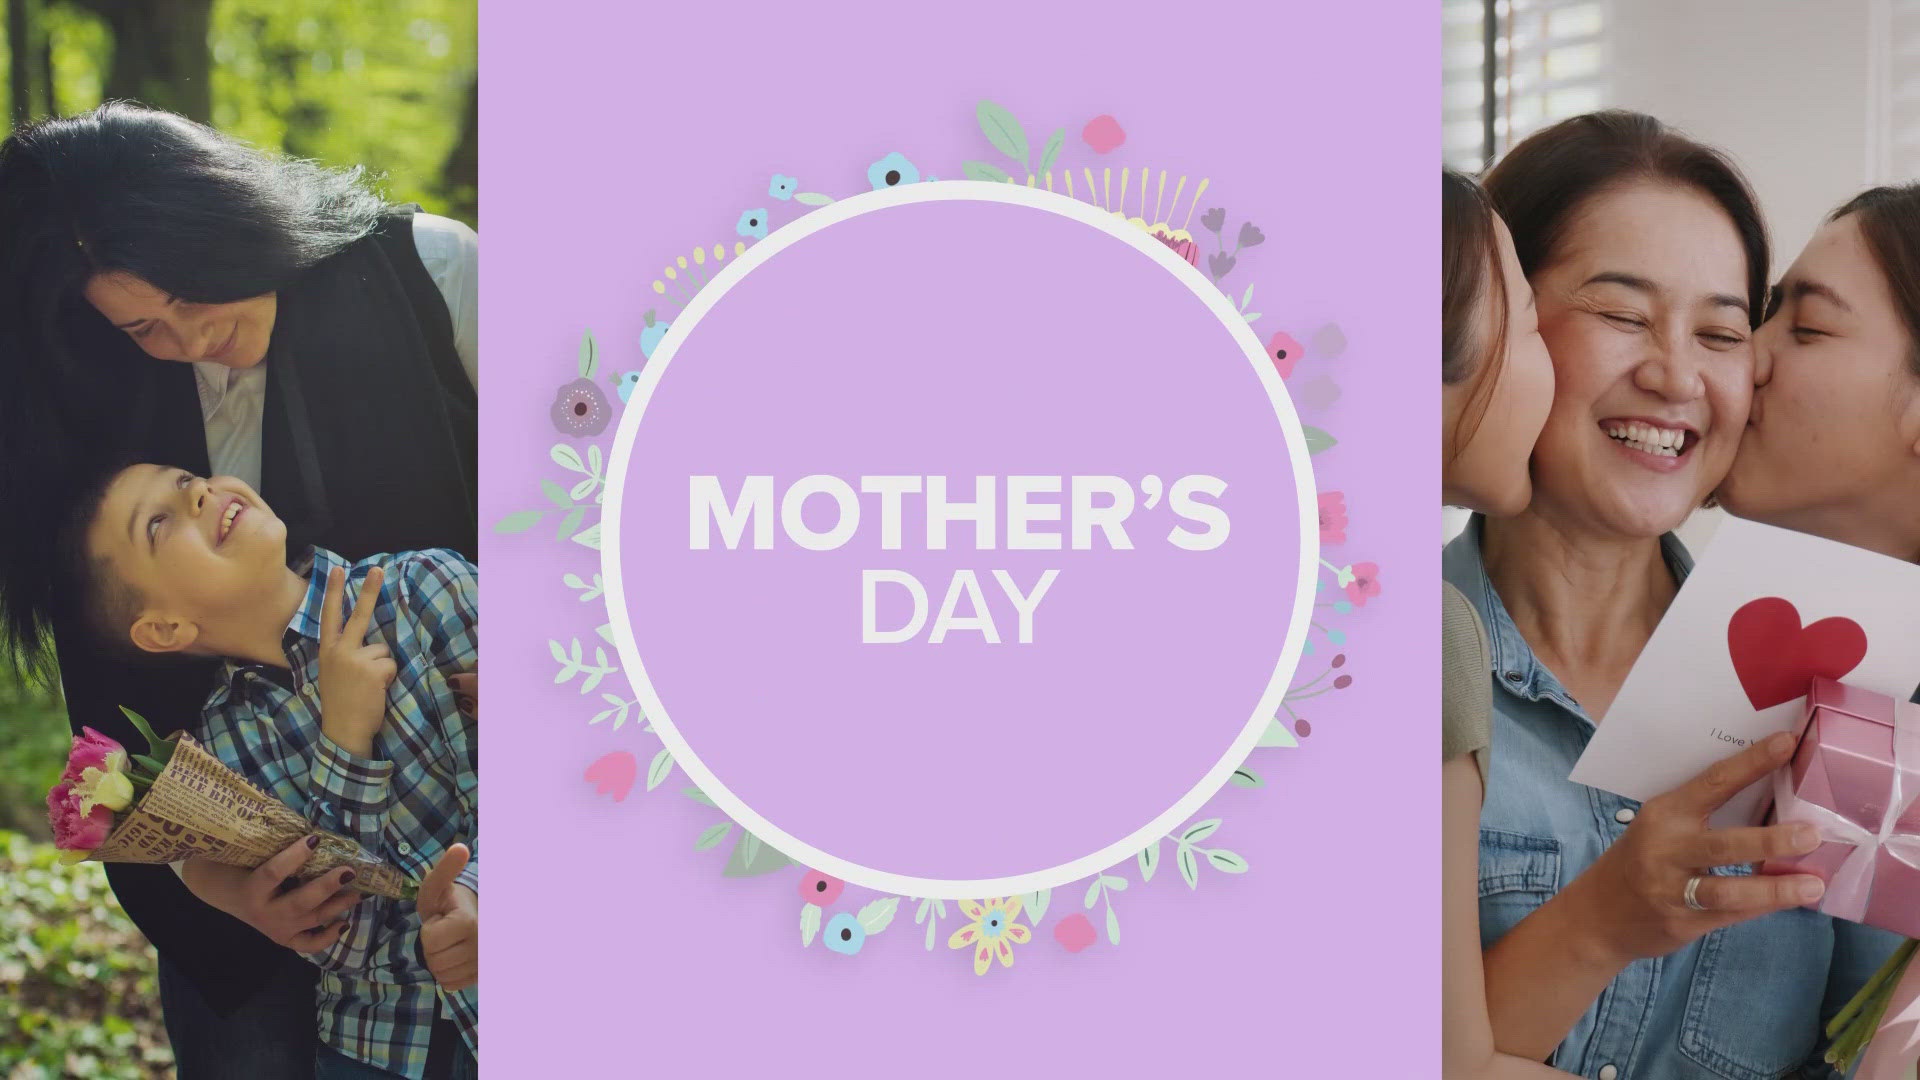 Here are some ideas to celebrate mom.